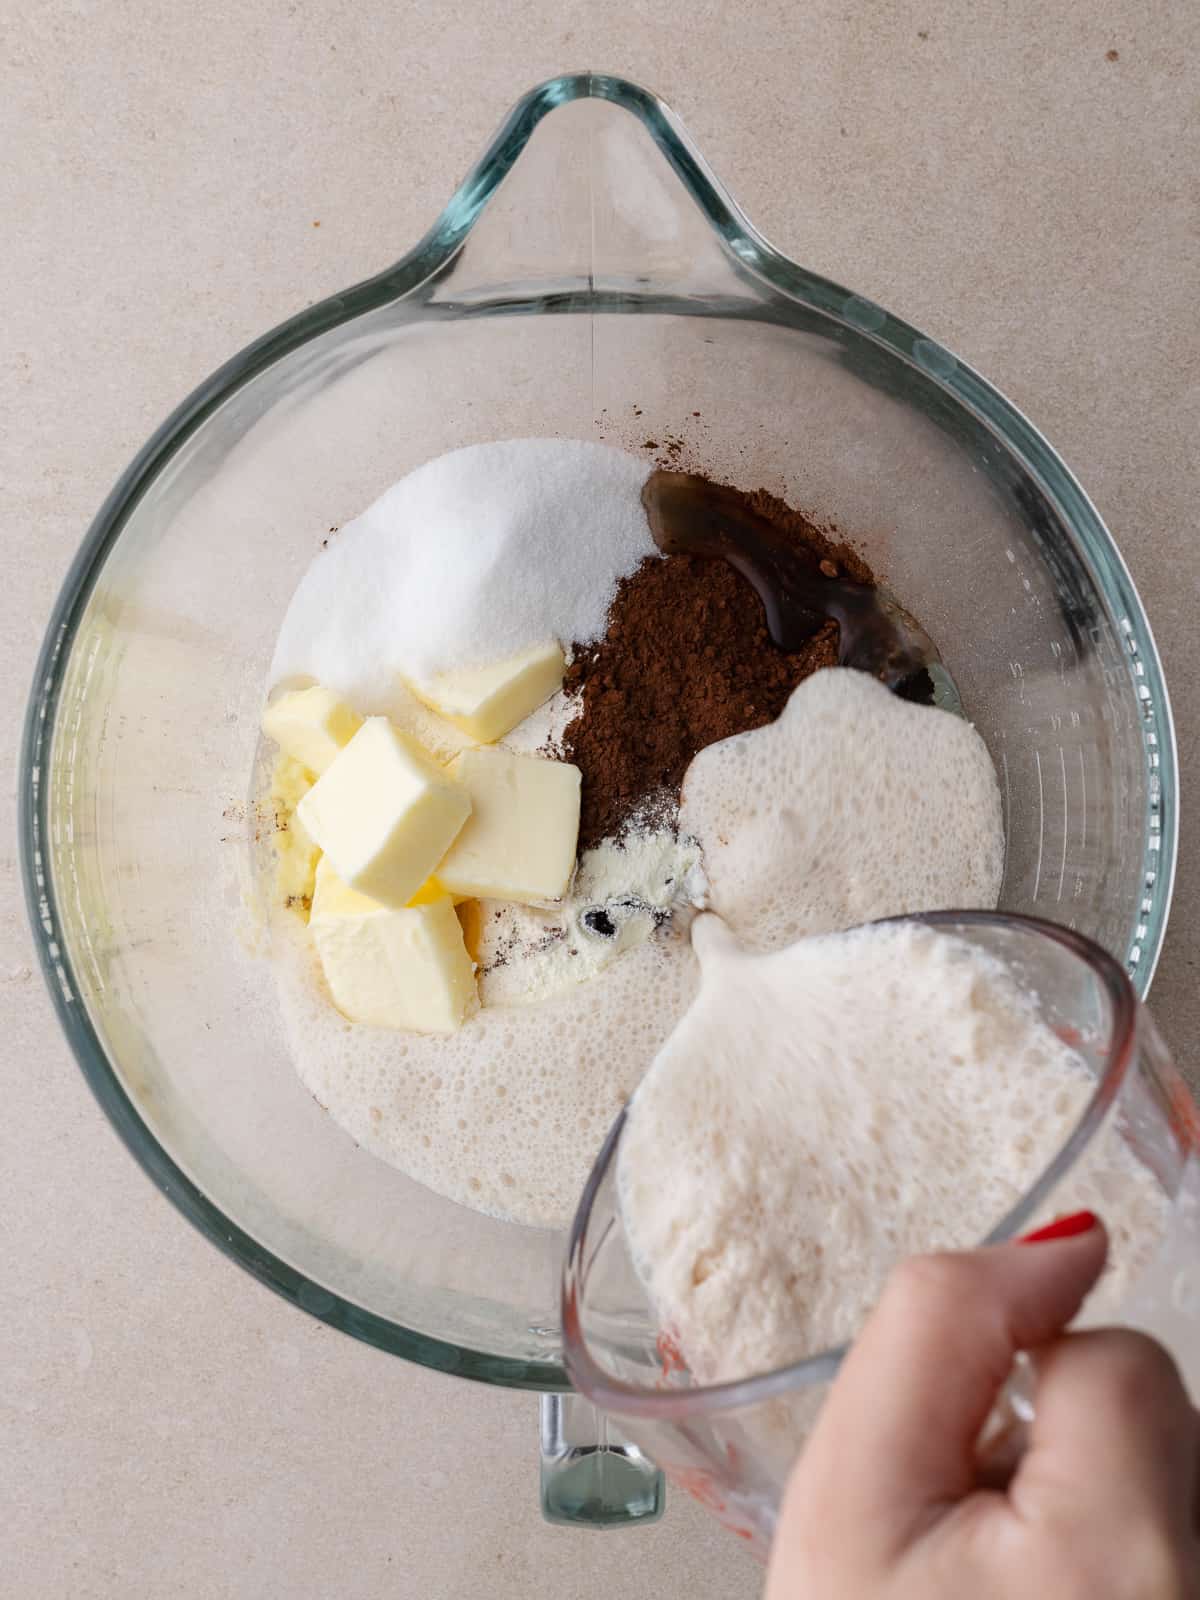 Flour, cocoa powder, sugar, butter, vanilla, milk powder, eggs, and yeast mixture in a glass mixing bowl